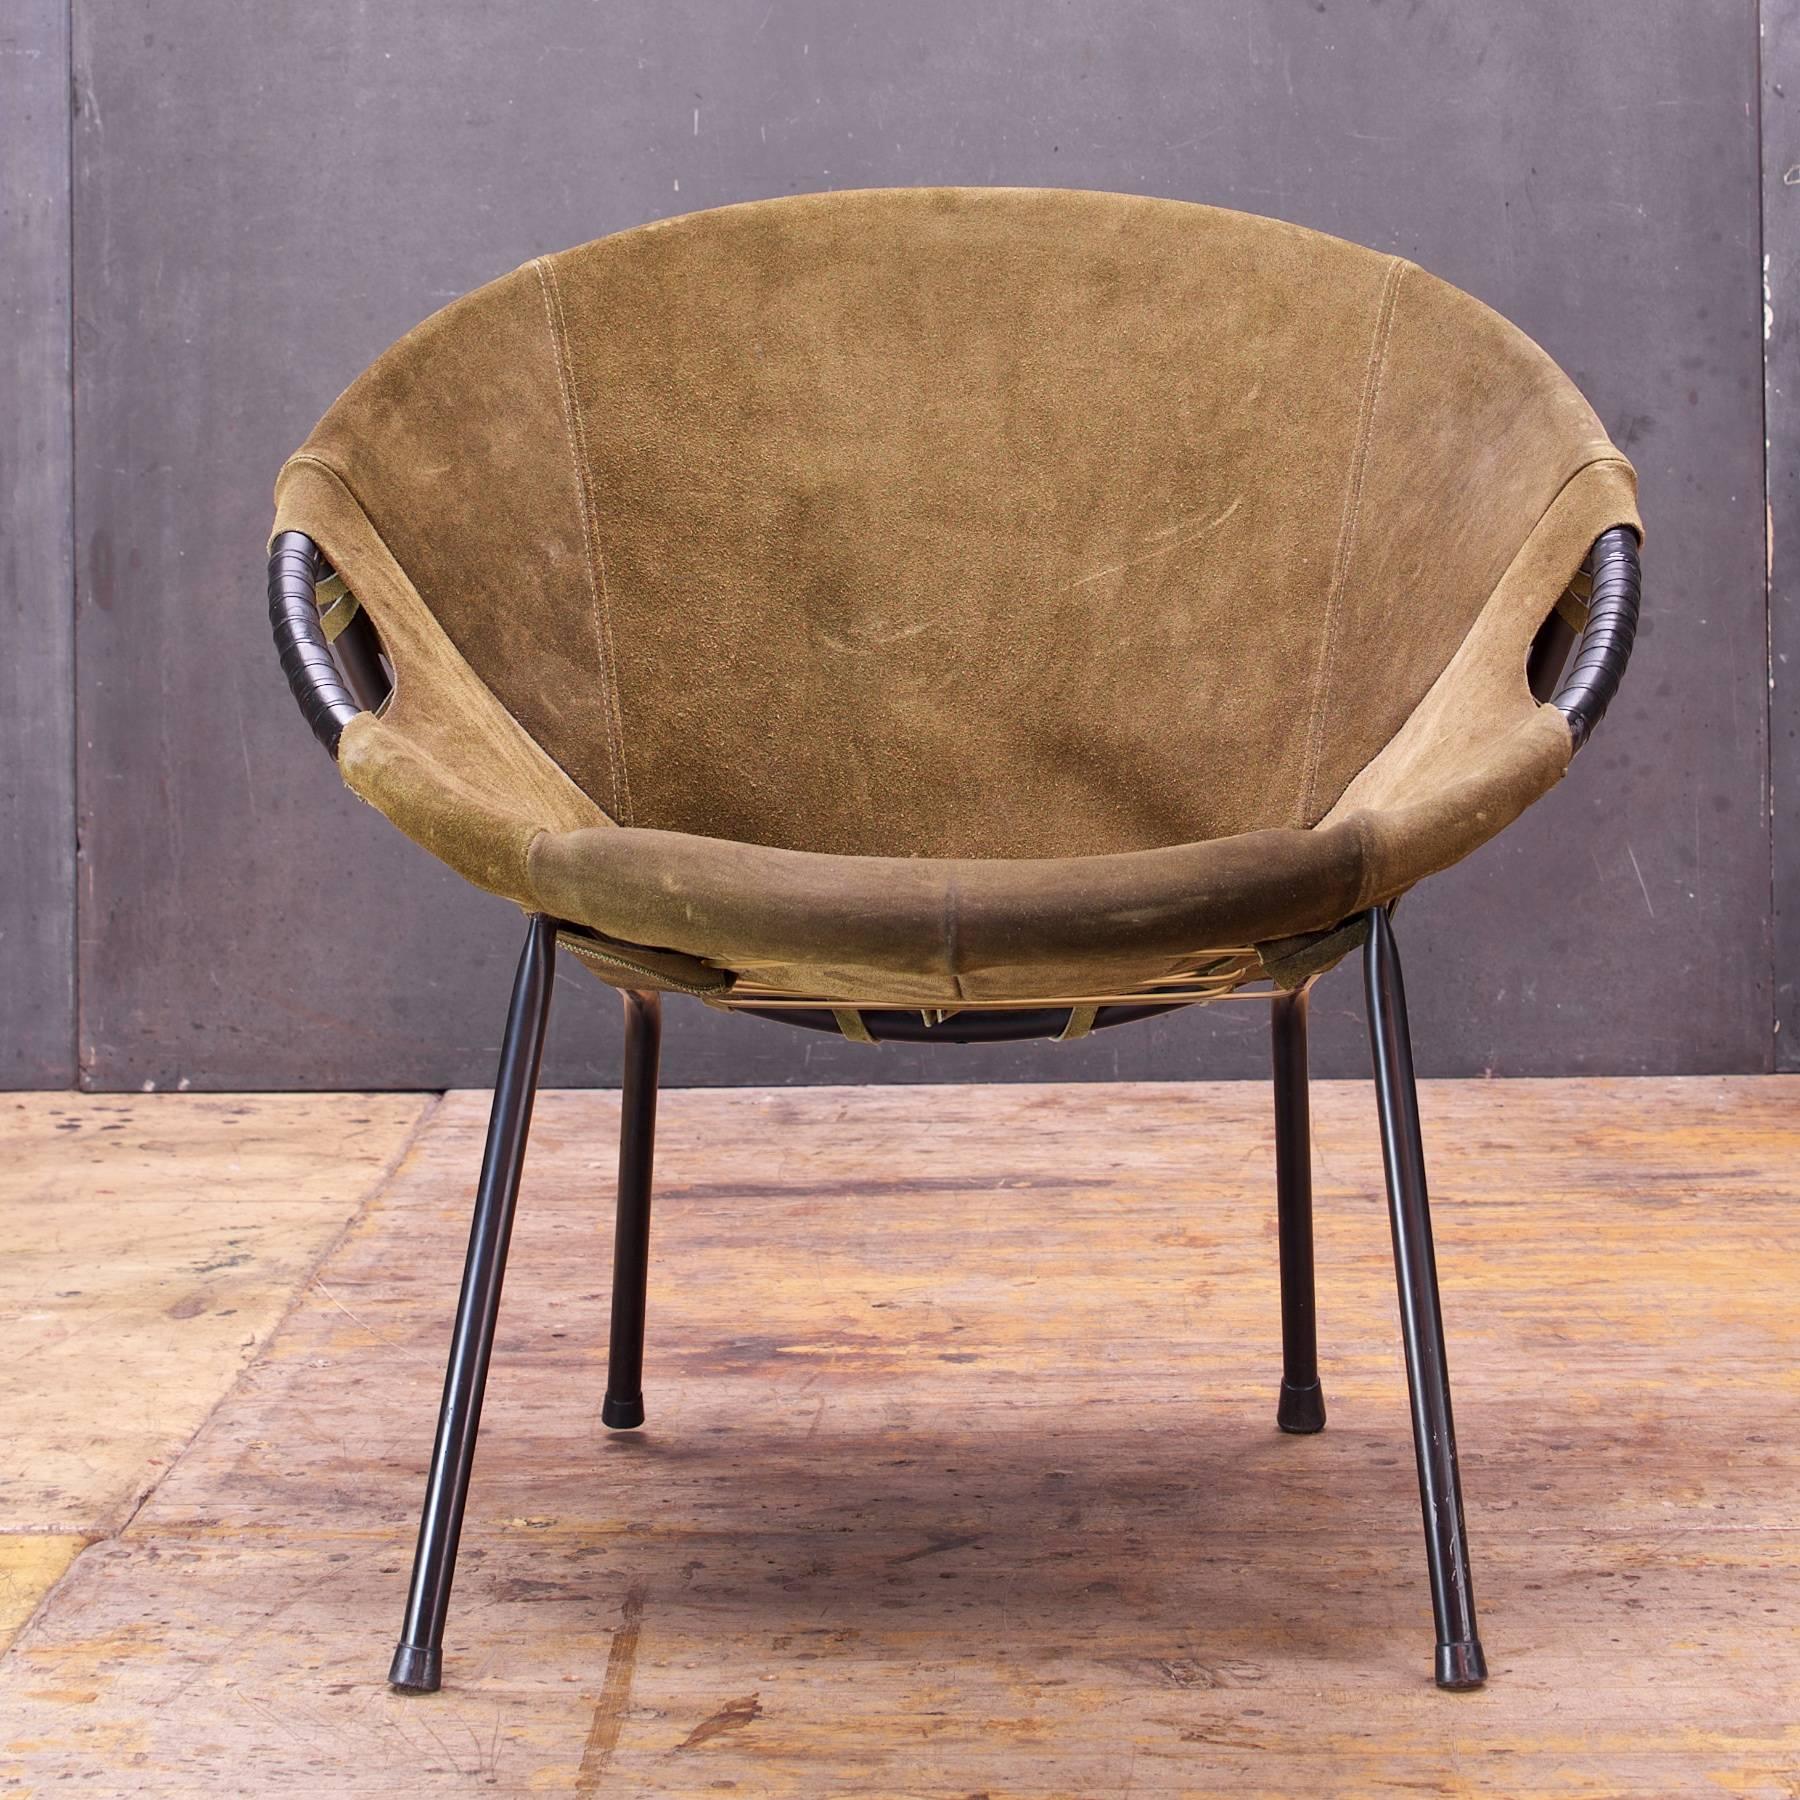 Scandinavian Modern Mid-Century Army Green Suede Leather Sling Hoop Circle Lounge Chair Mad Men